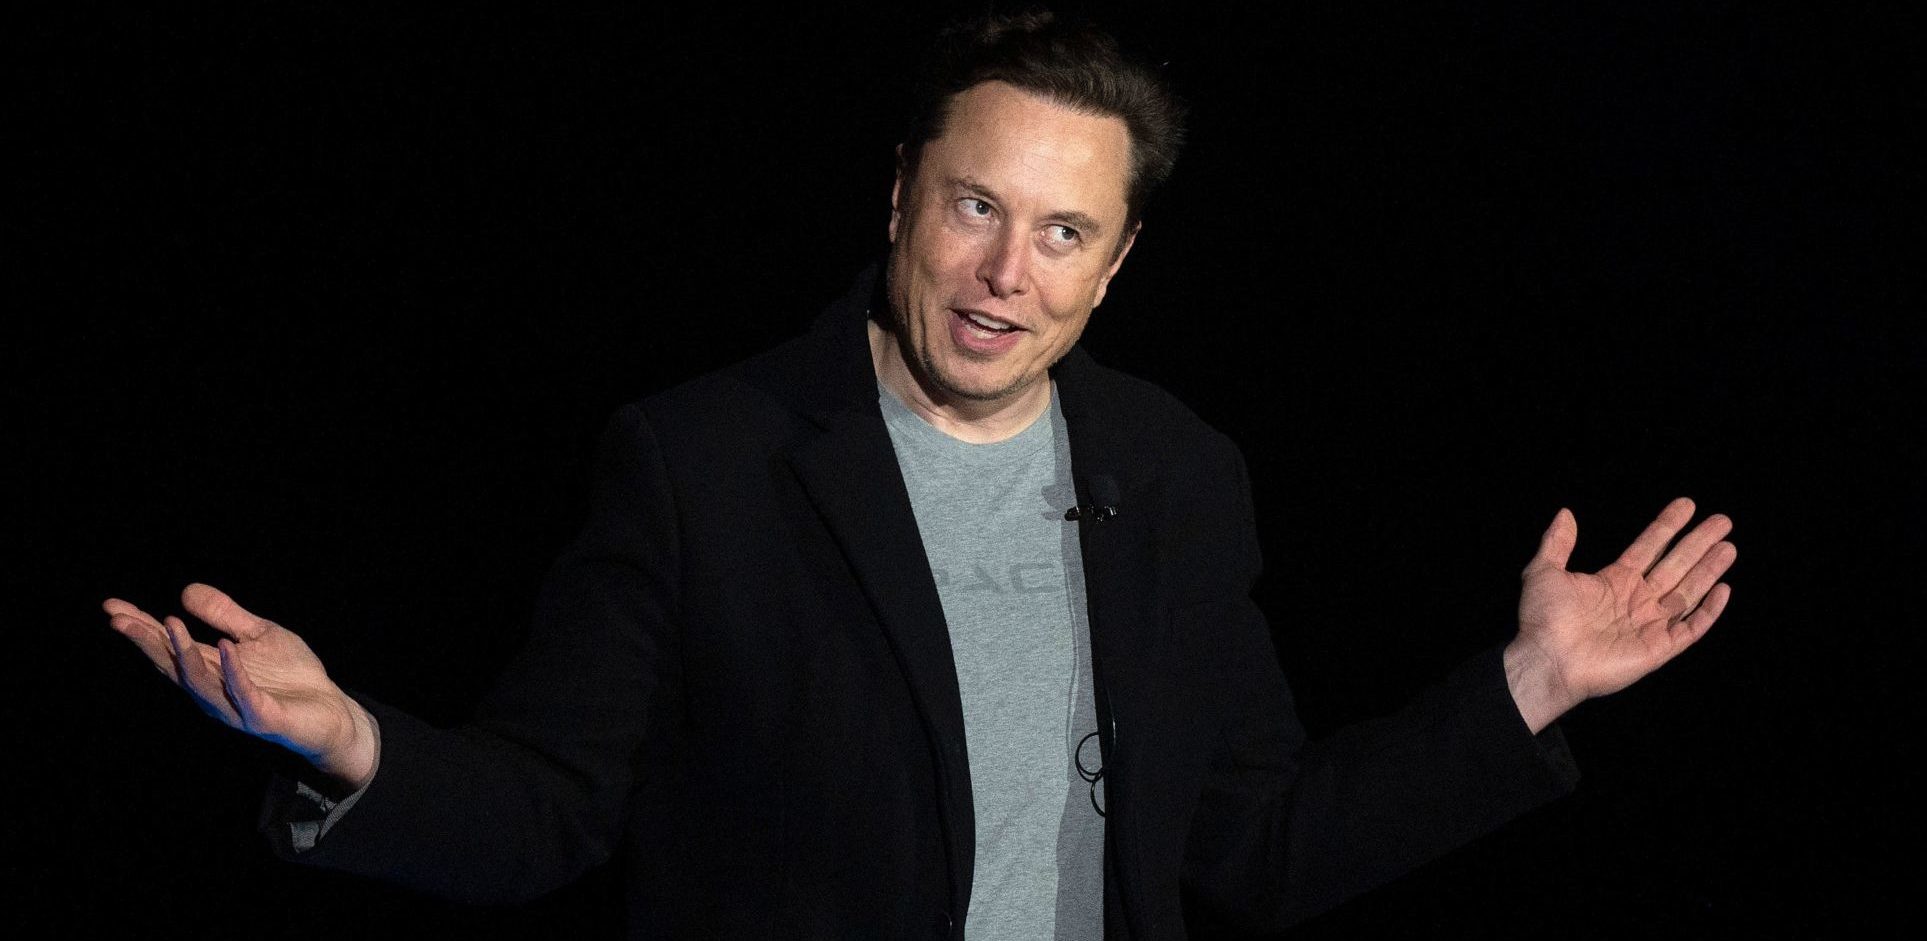 The most surprising revelation in Elon Musk's Twitter files - The Post